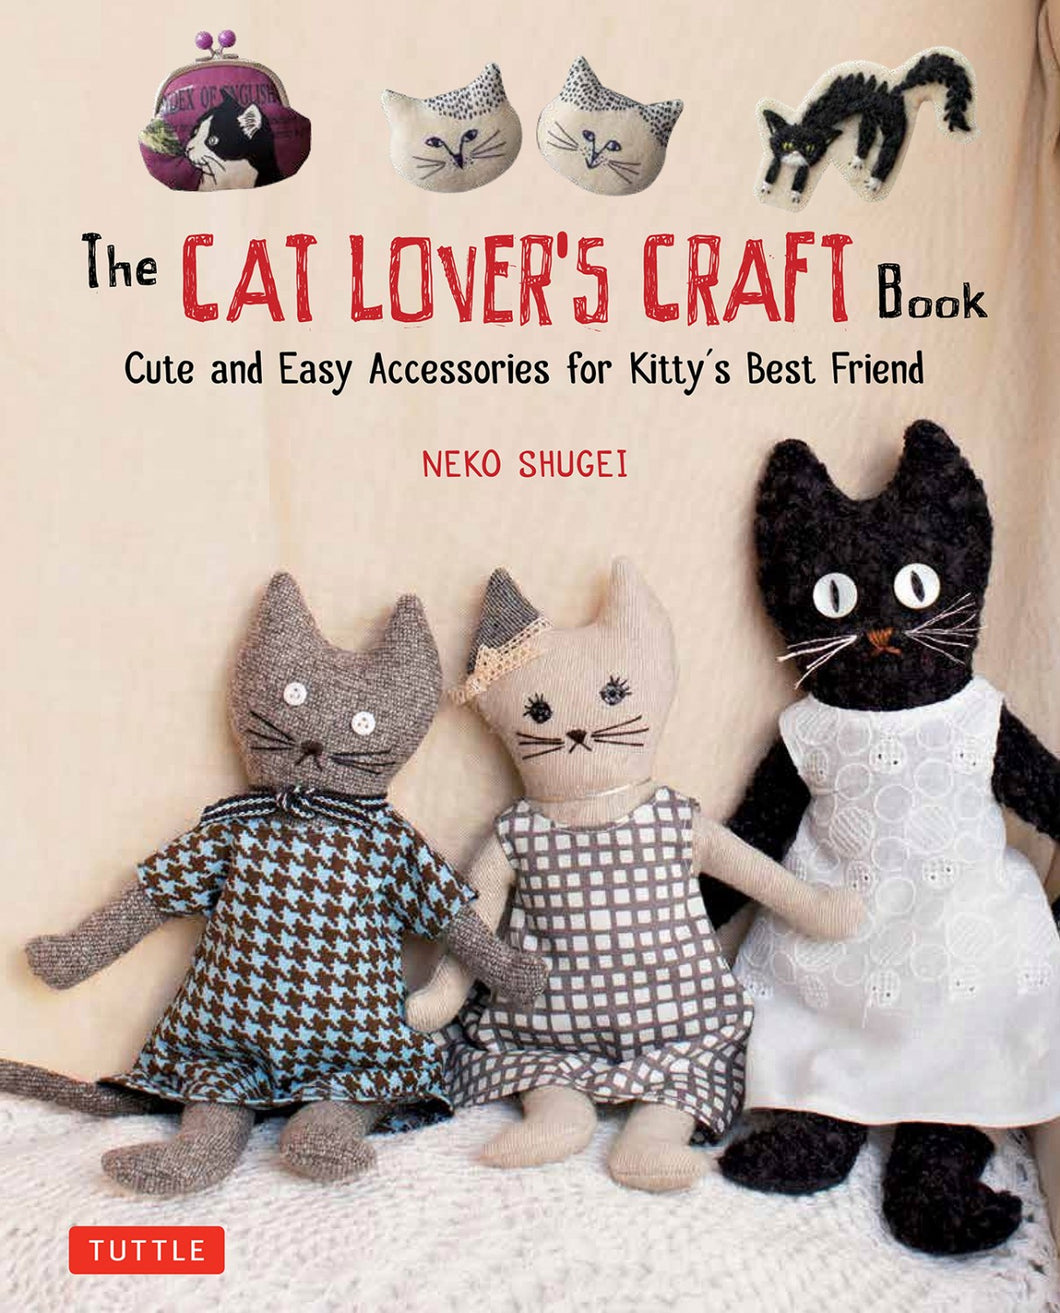 The Cat Lover's Craft book